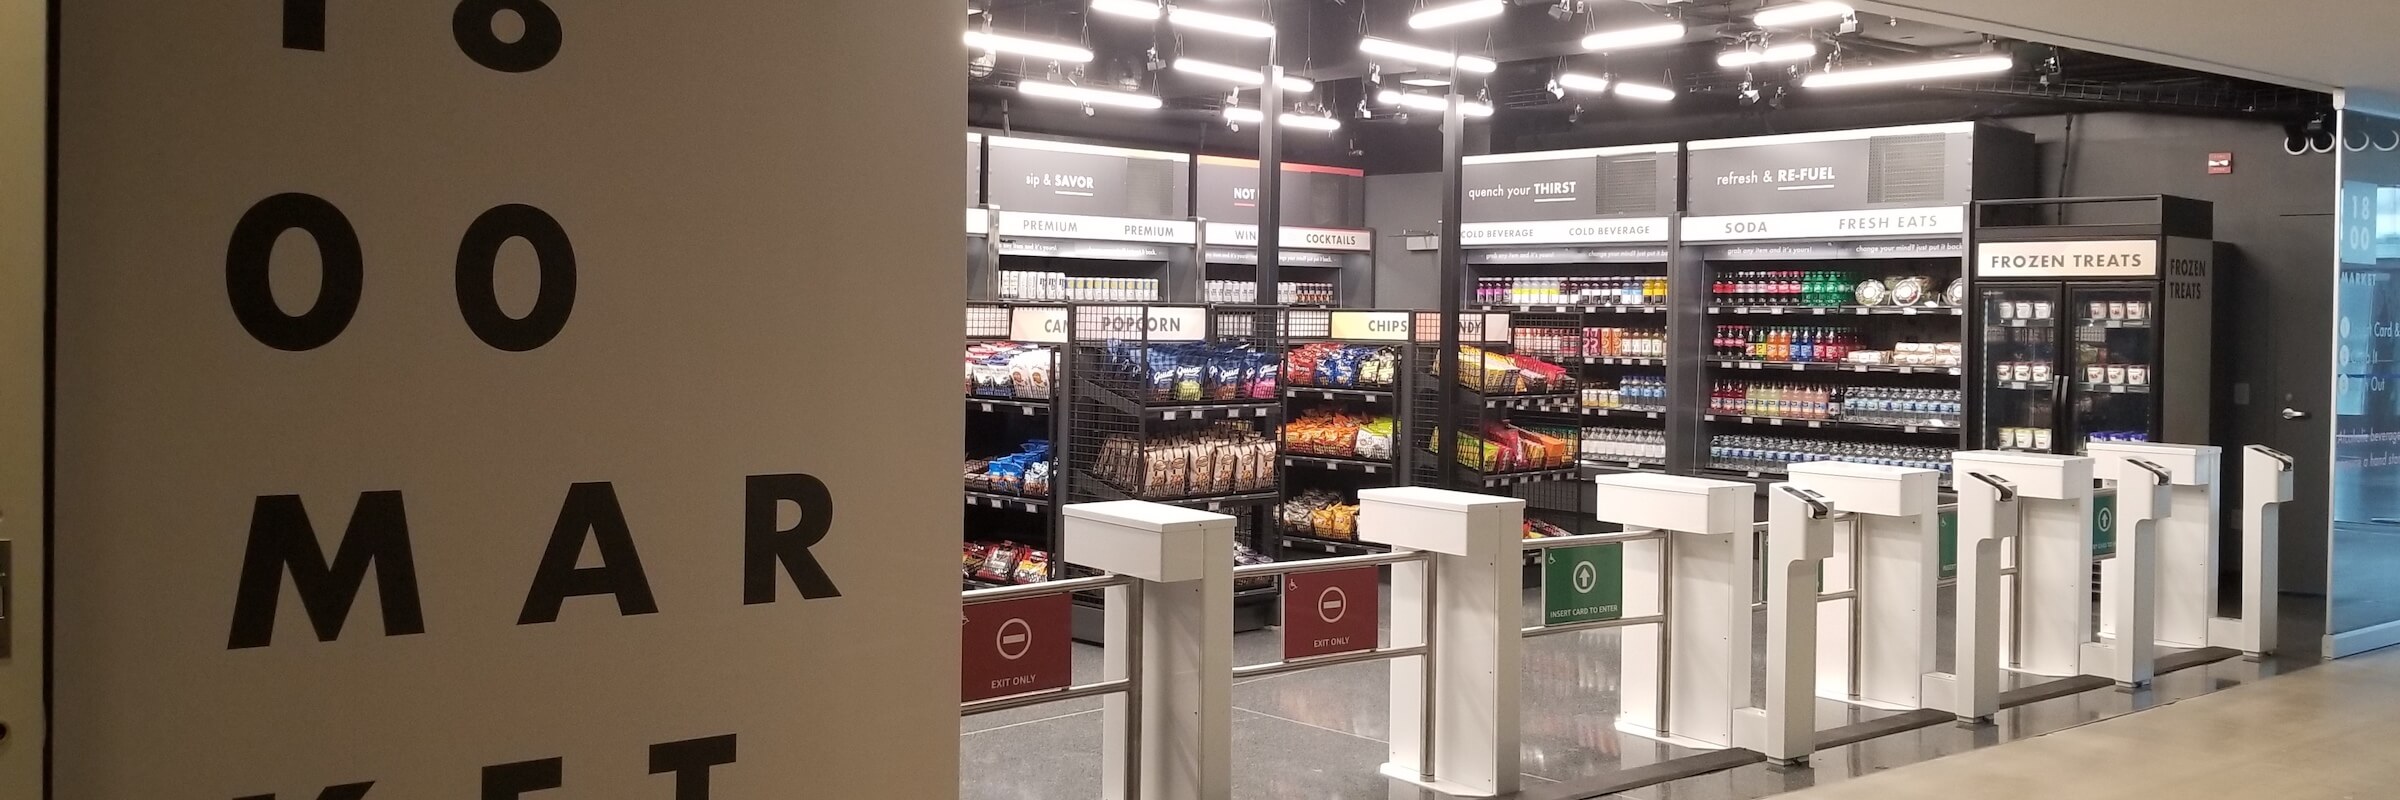 Grab and go market in the united center - Desktop